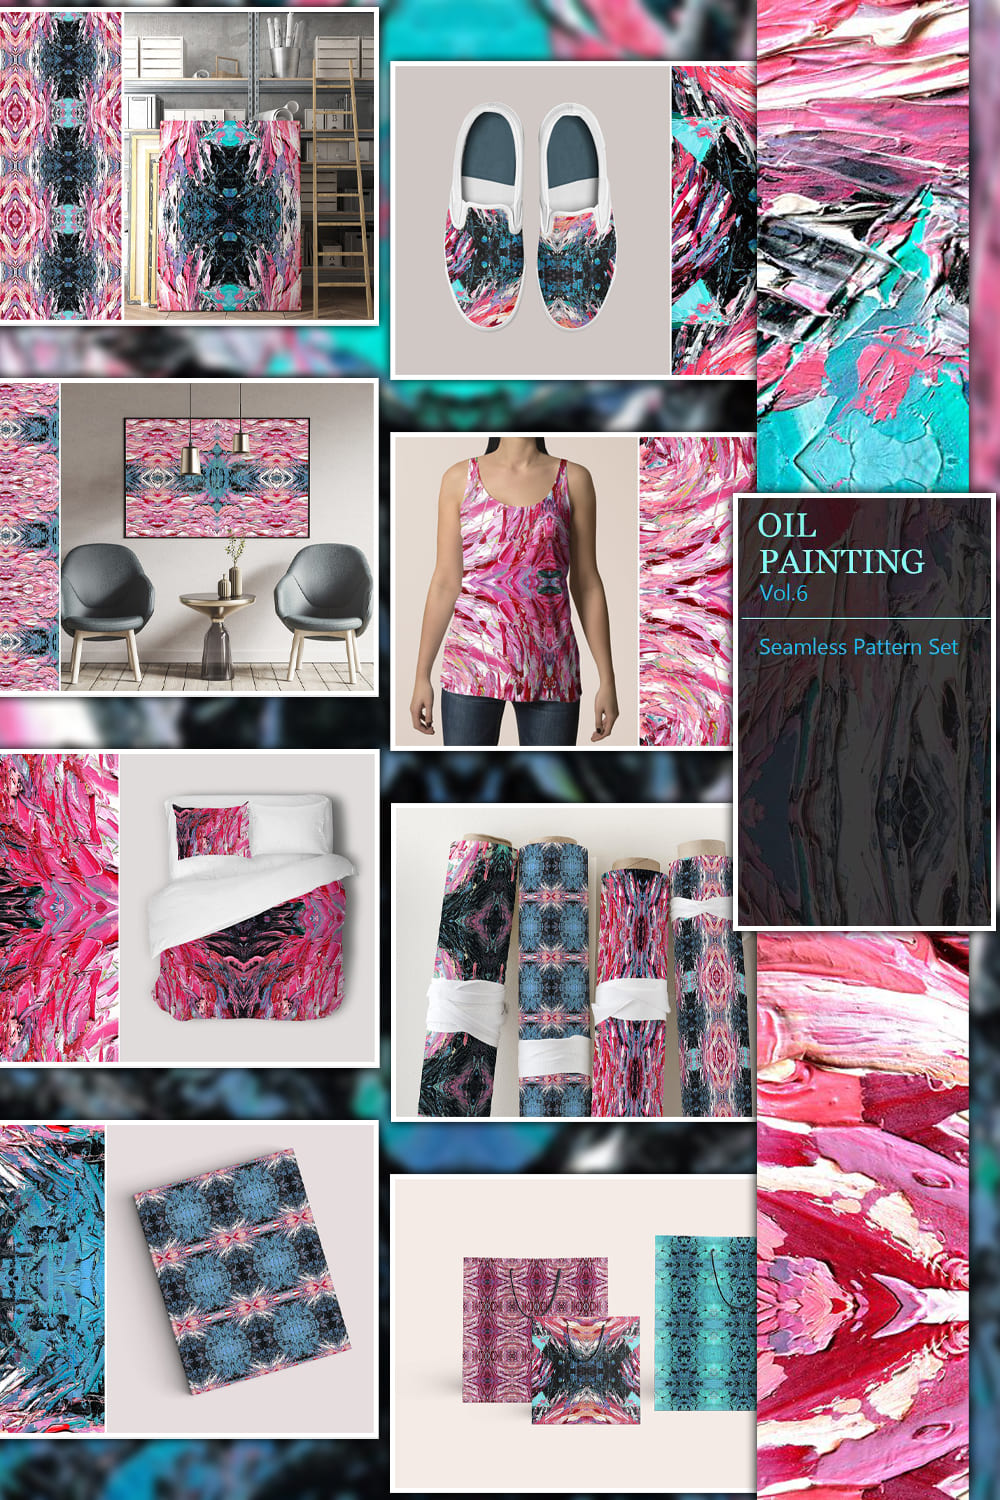 Oil Painting Seamless Patterns Vol.6 pinterest image.